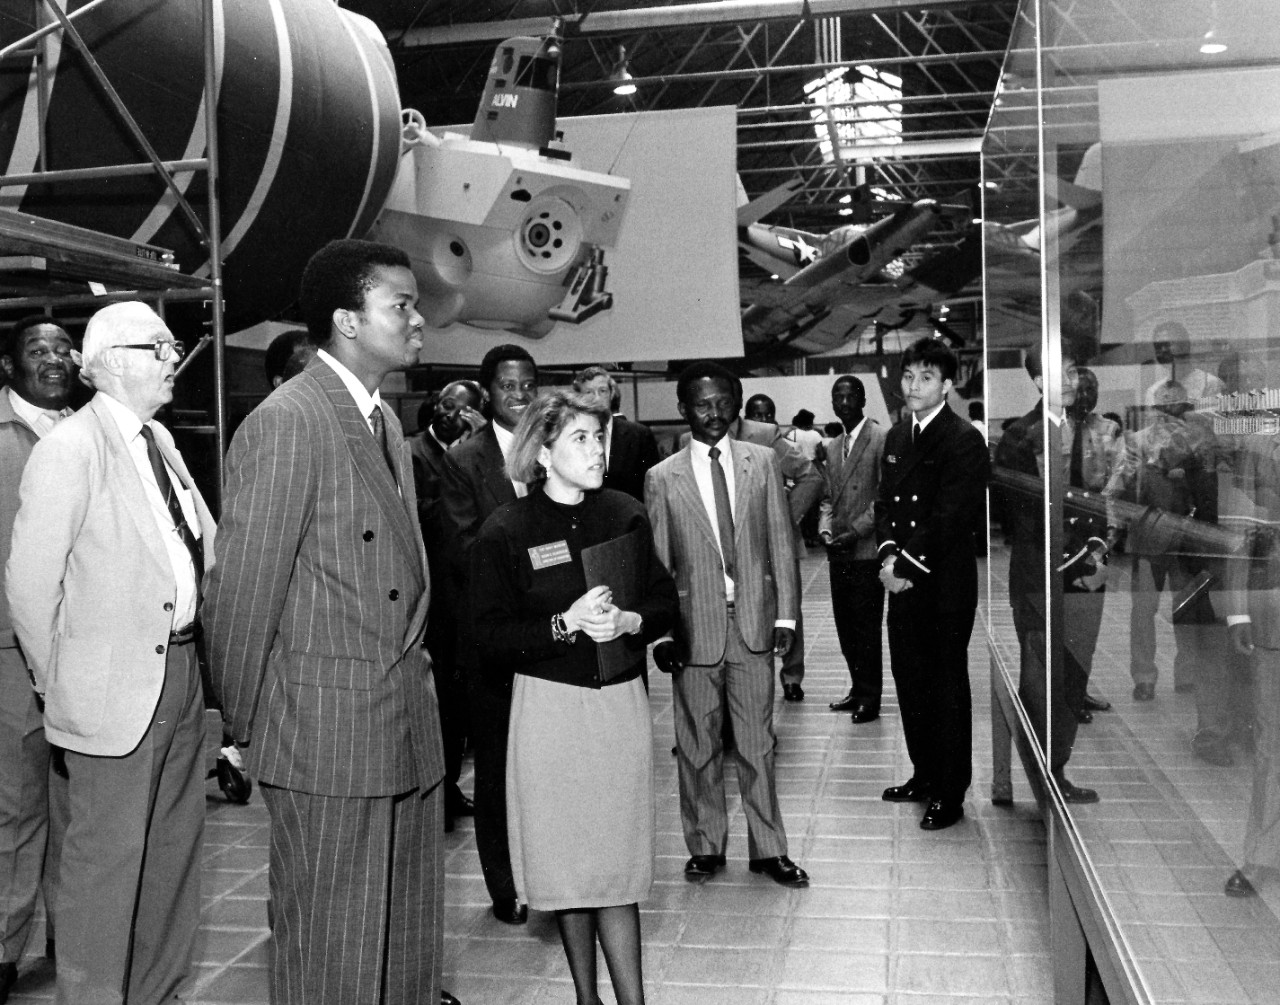 NMUSN-54:   King of Swaziland, Mswati III, 1989.  Looking at a ship model while visiting the Navy Museum, Washington, D.C.     National Museum of the U.S. Navy Photograph Collection.  